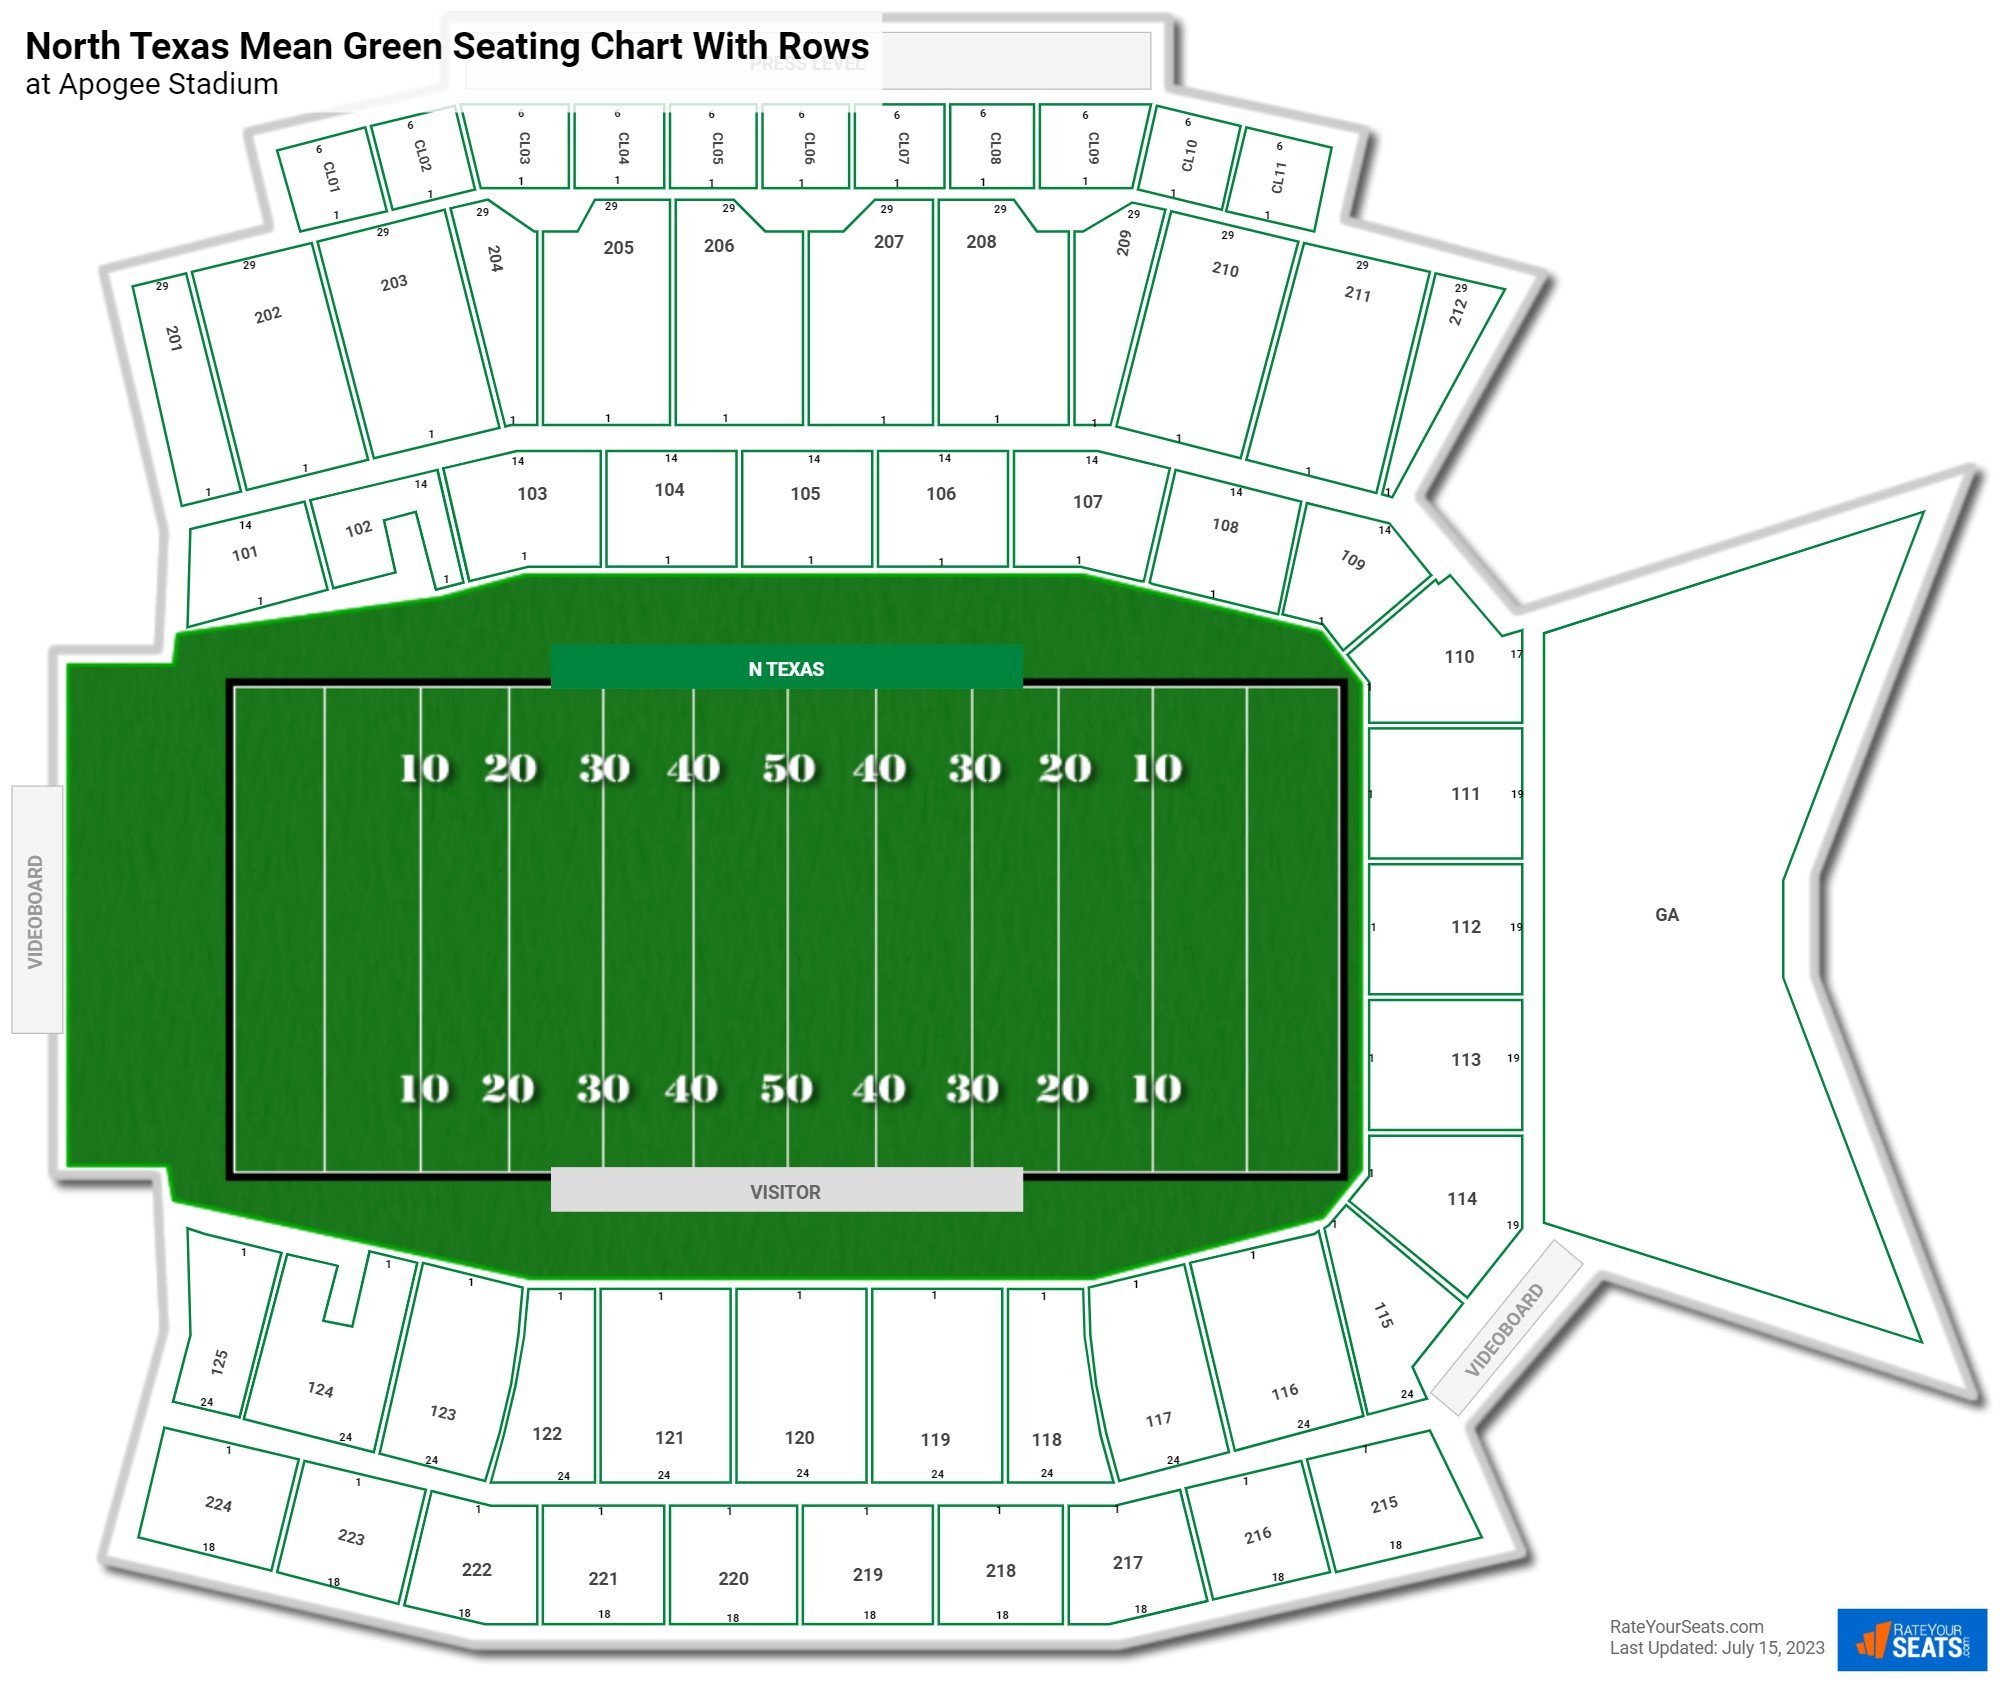 Apogee Stadium seating chart with row numbers